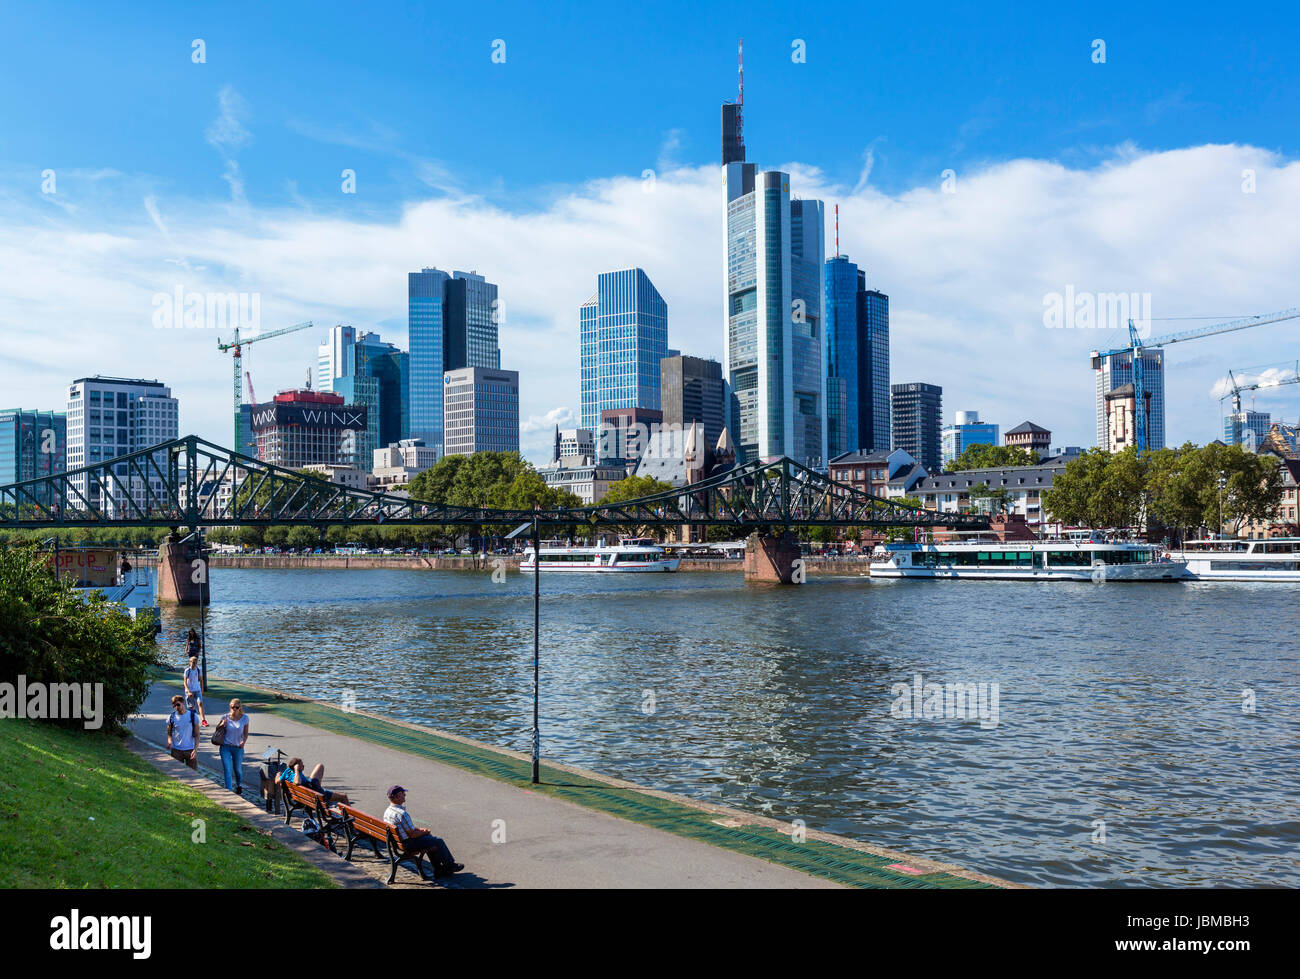 View towards the Eiserner Steg and financial district from the banks of the River Main, Frankfurt, Hesse, Germany Stock Photo